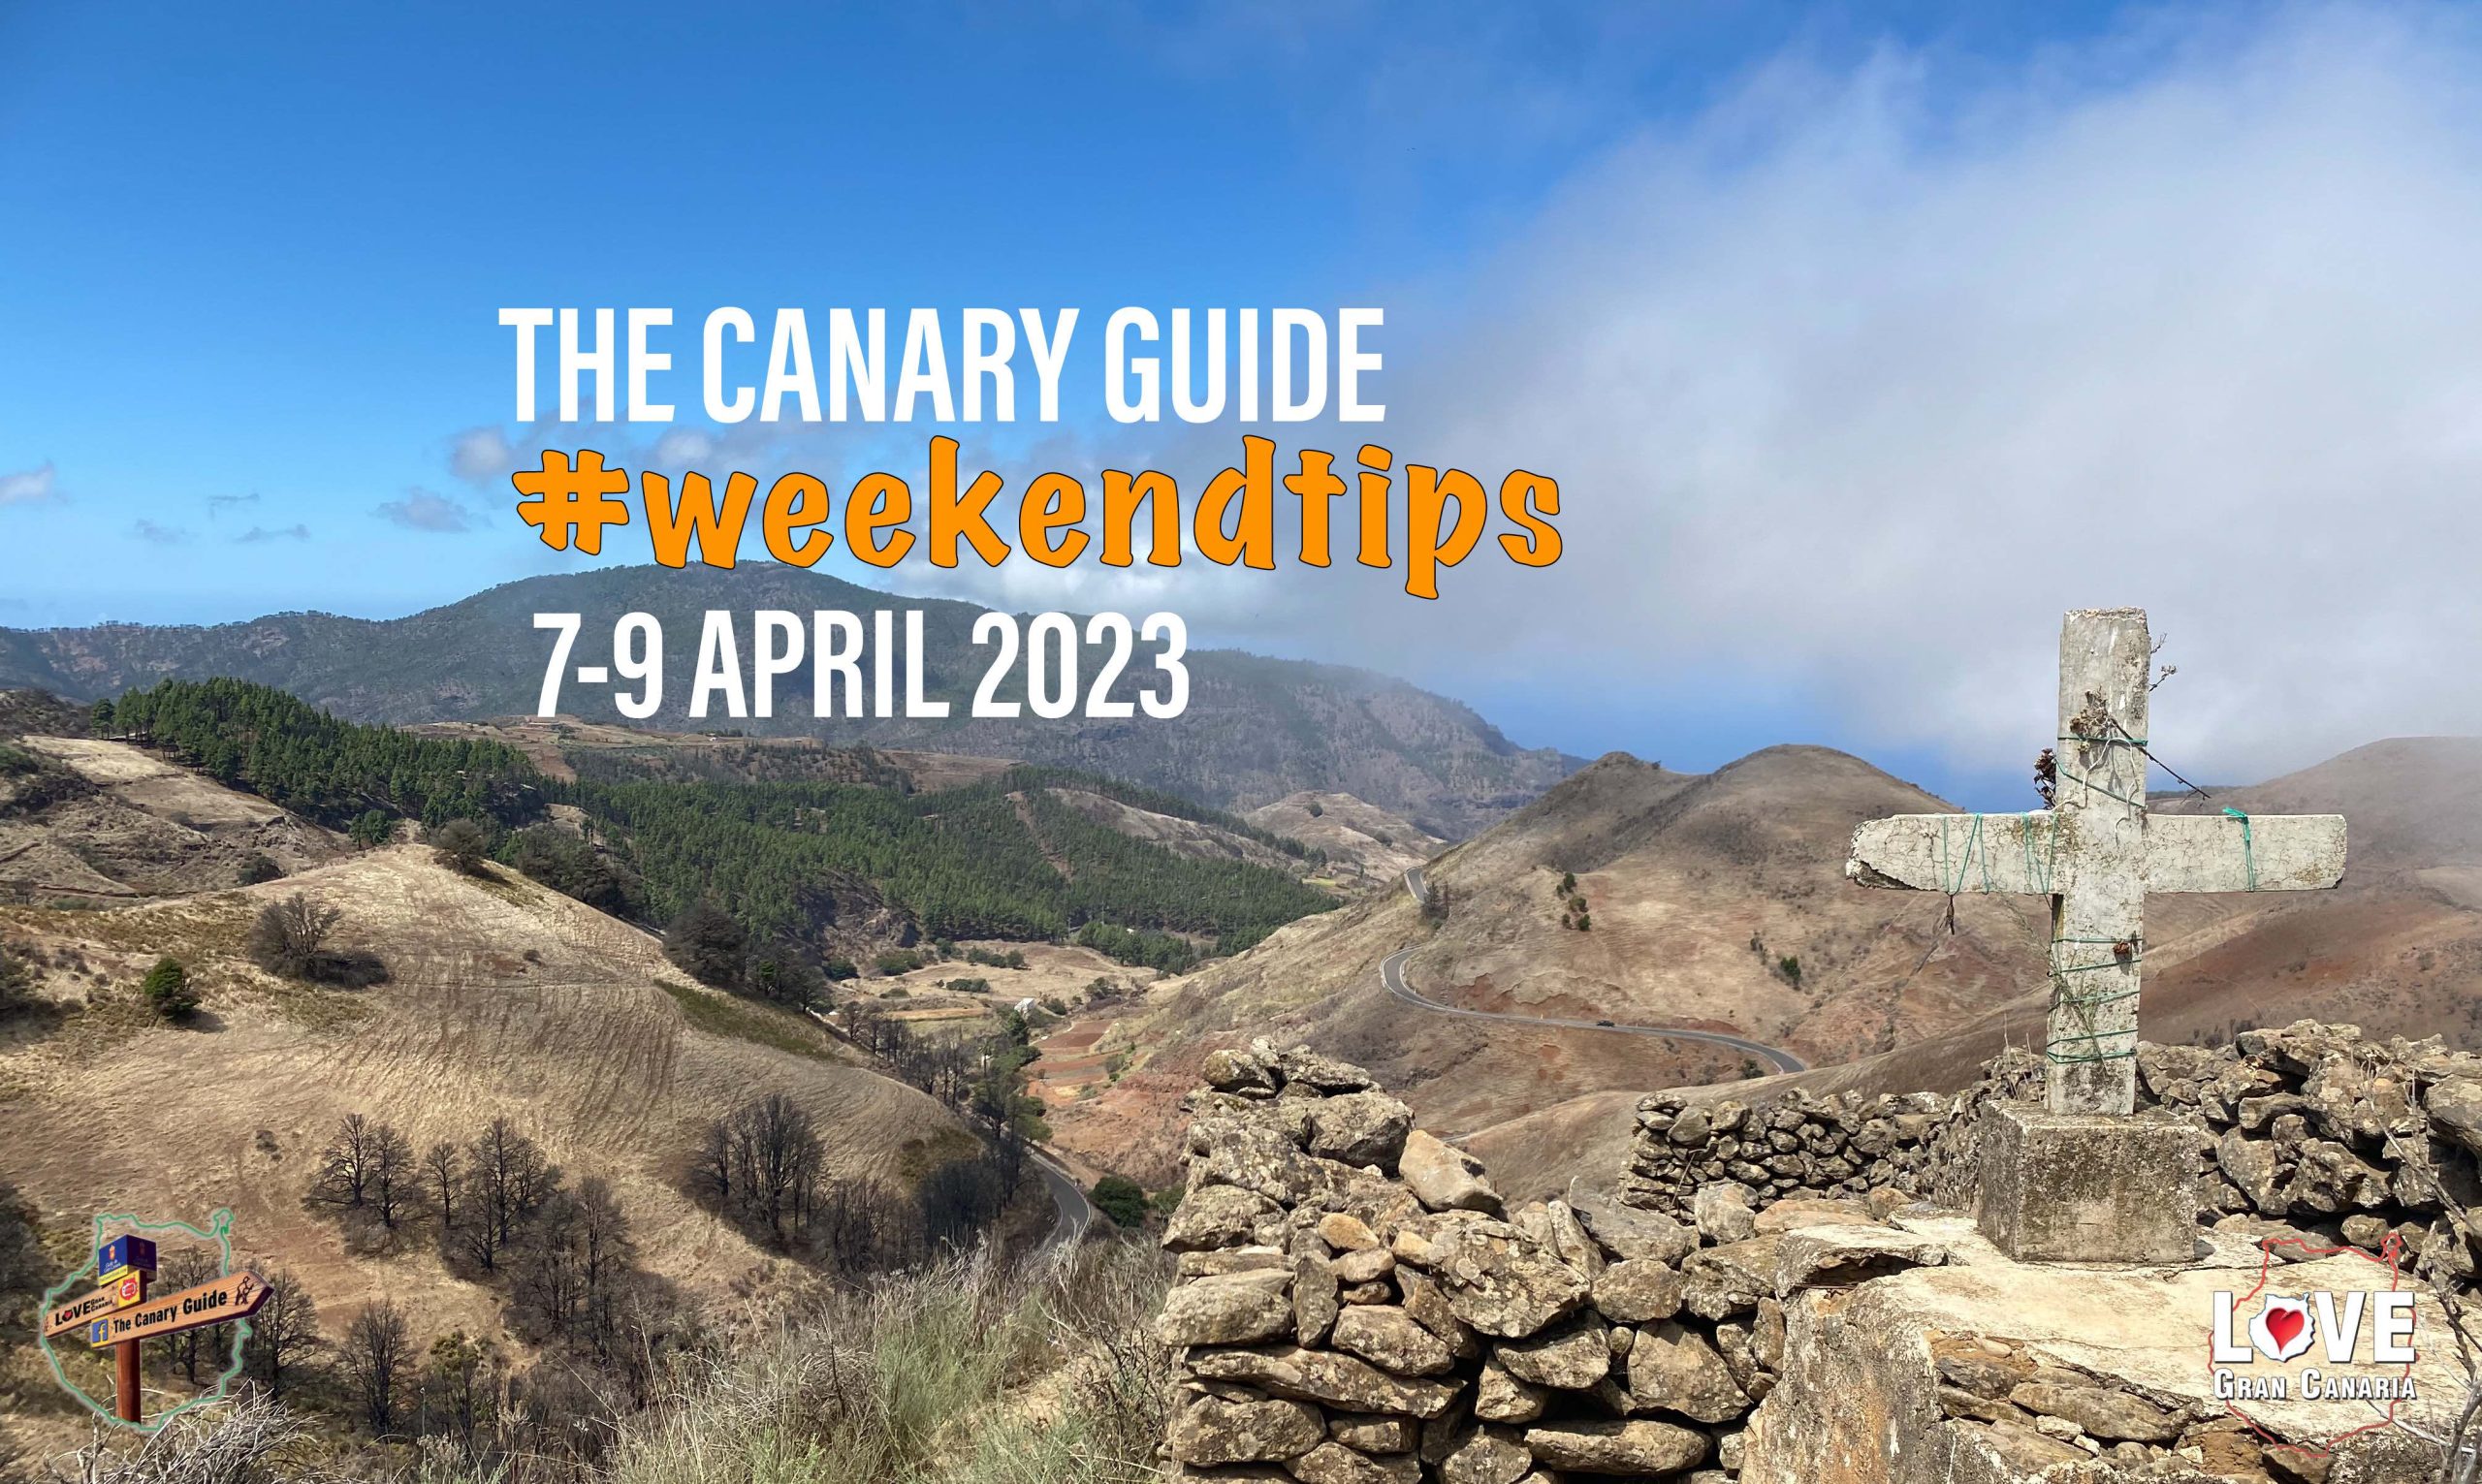 Tendero prisa Contratista The Canary Guide #WeekendTips 7-9 April 2023 : The Canary News